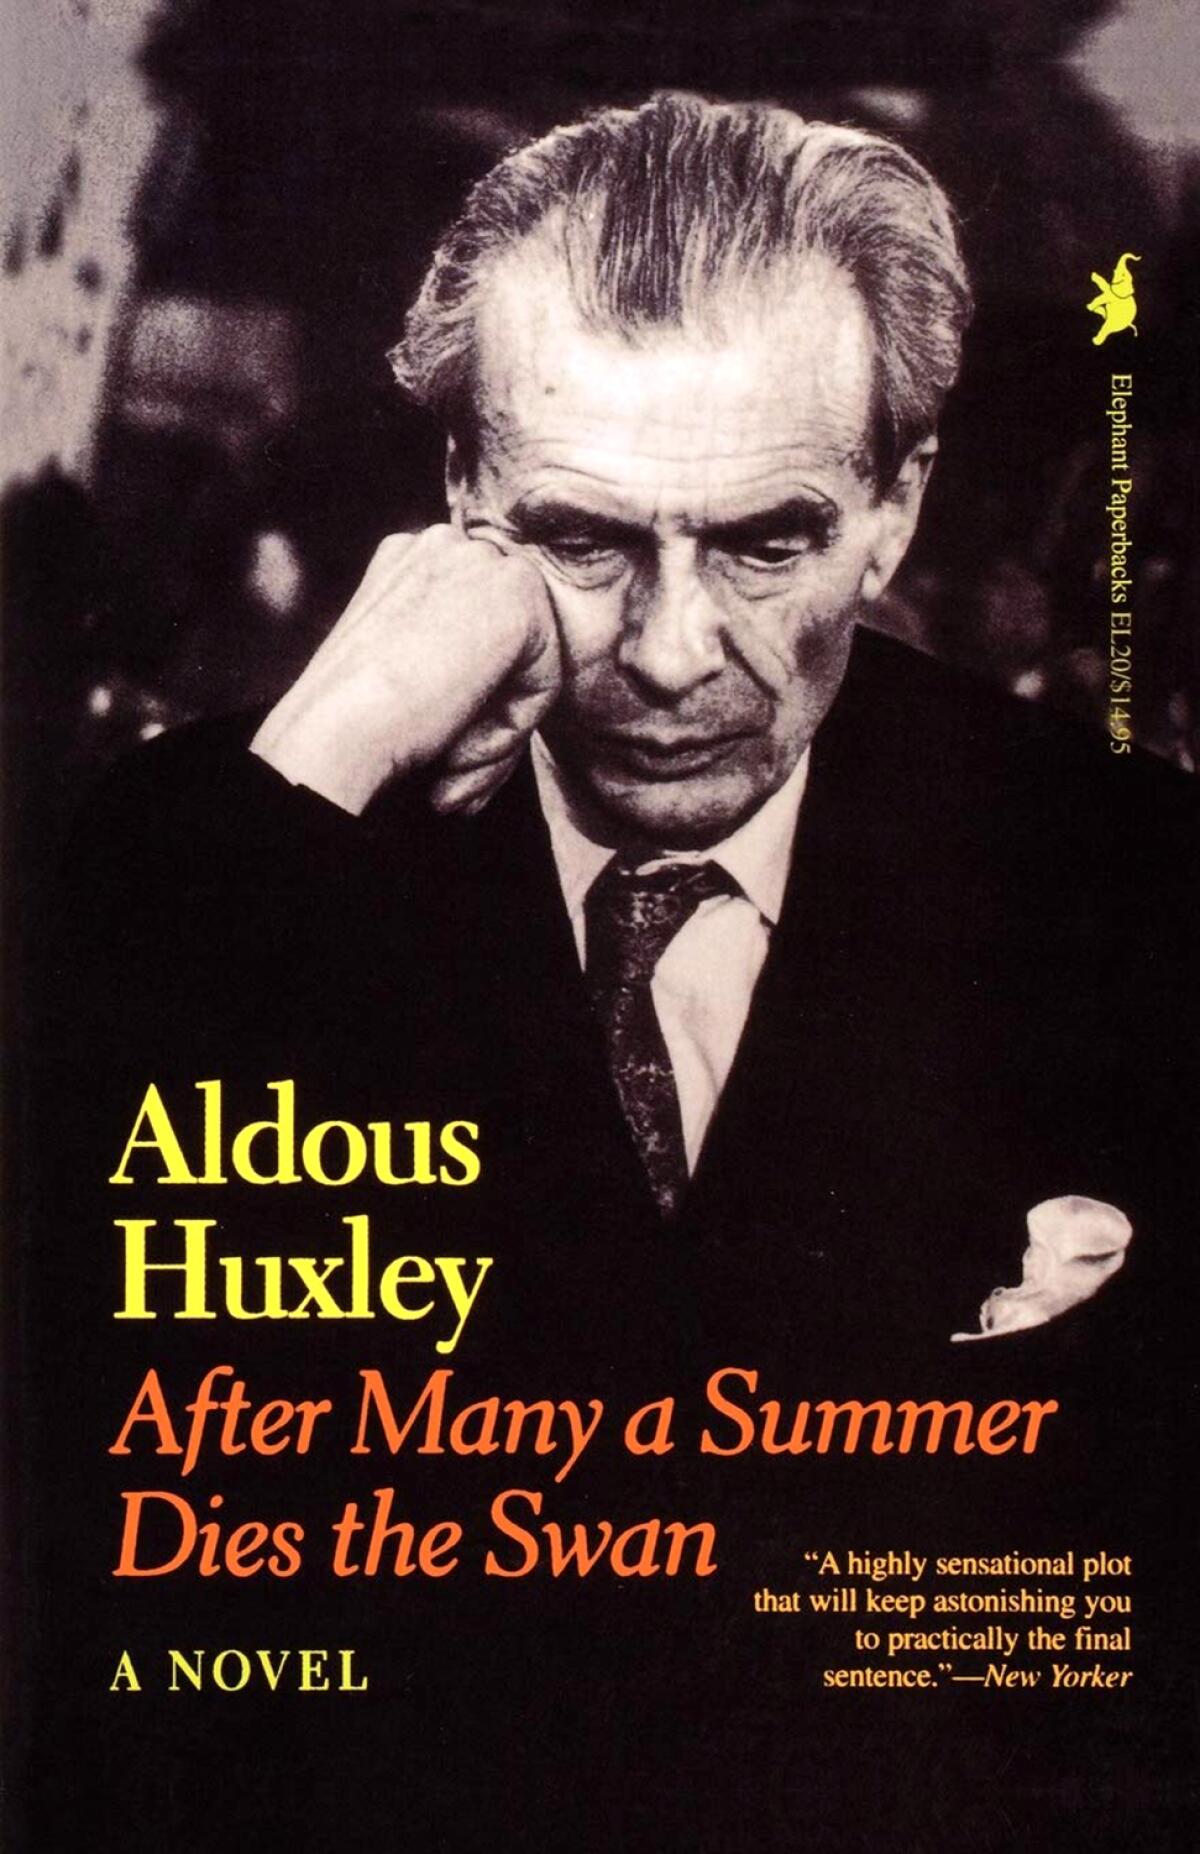 "After Many a Summer Dies the Swan" by Aldus Huxley, 1939